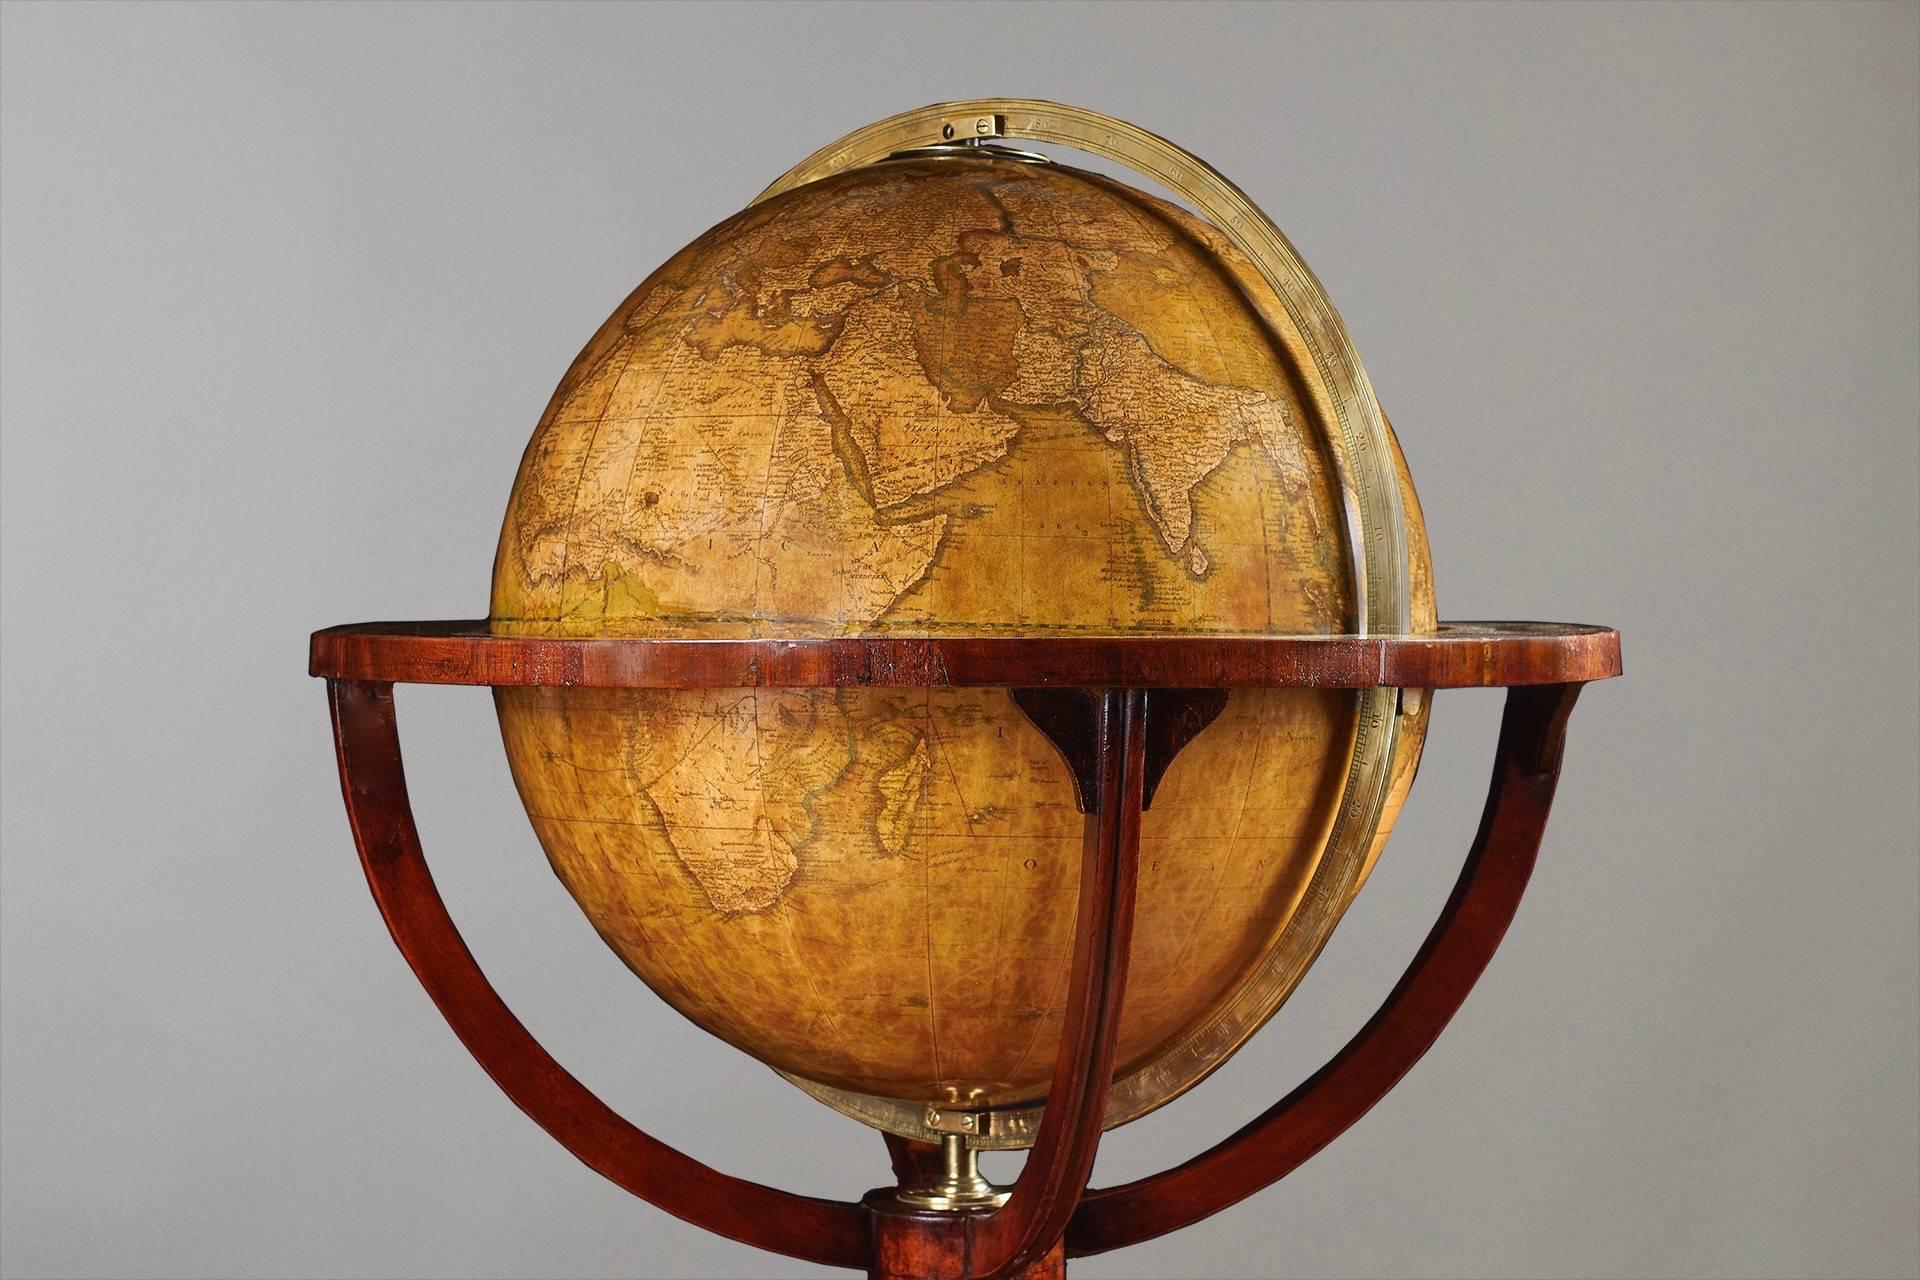 An attractive 16 inch diameter terrestrial floor standing globe, made and signed by Manning & Wells, London, dated 1854. This globe retains its original signed compass incorporated into the stretcher. Restored.